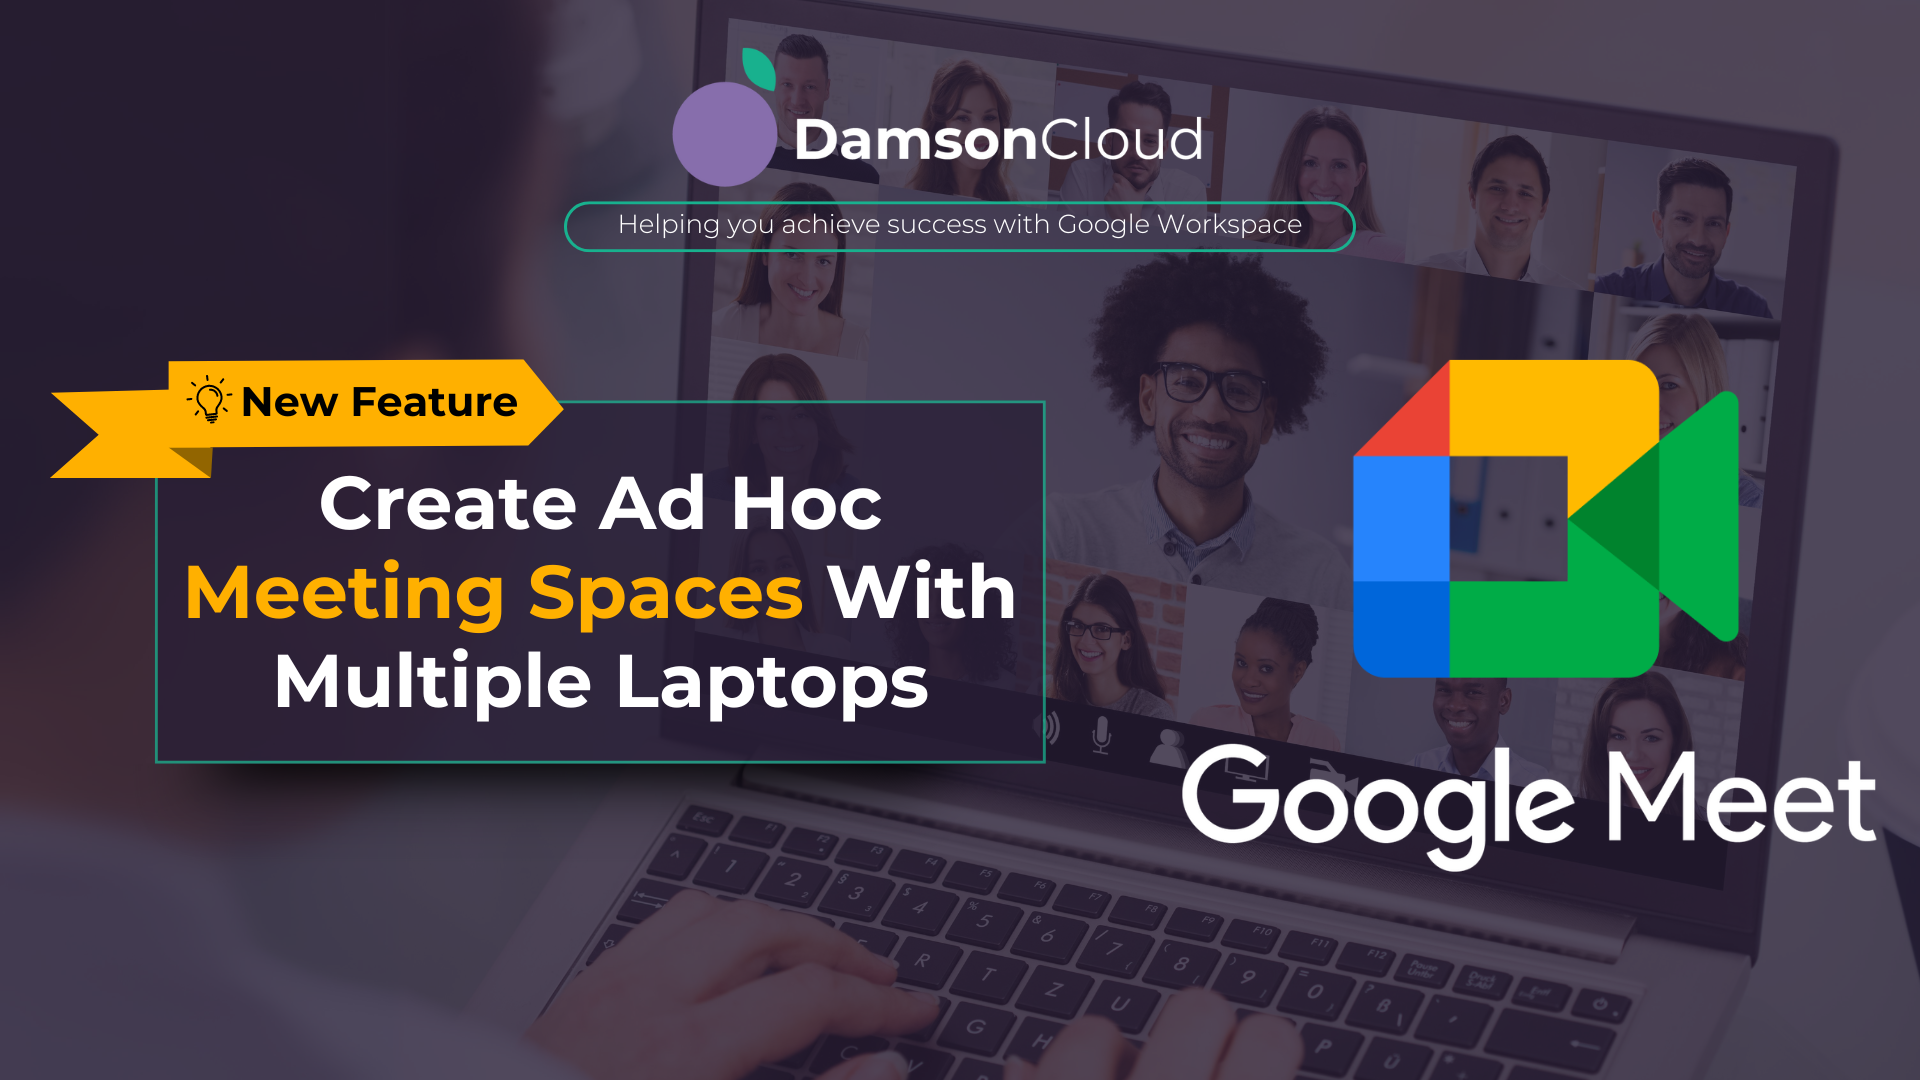 NEW FEATURE: Create Ad Hoc Meeting Spaces With Multiple Laptops on Google Meet